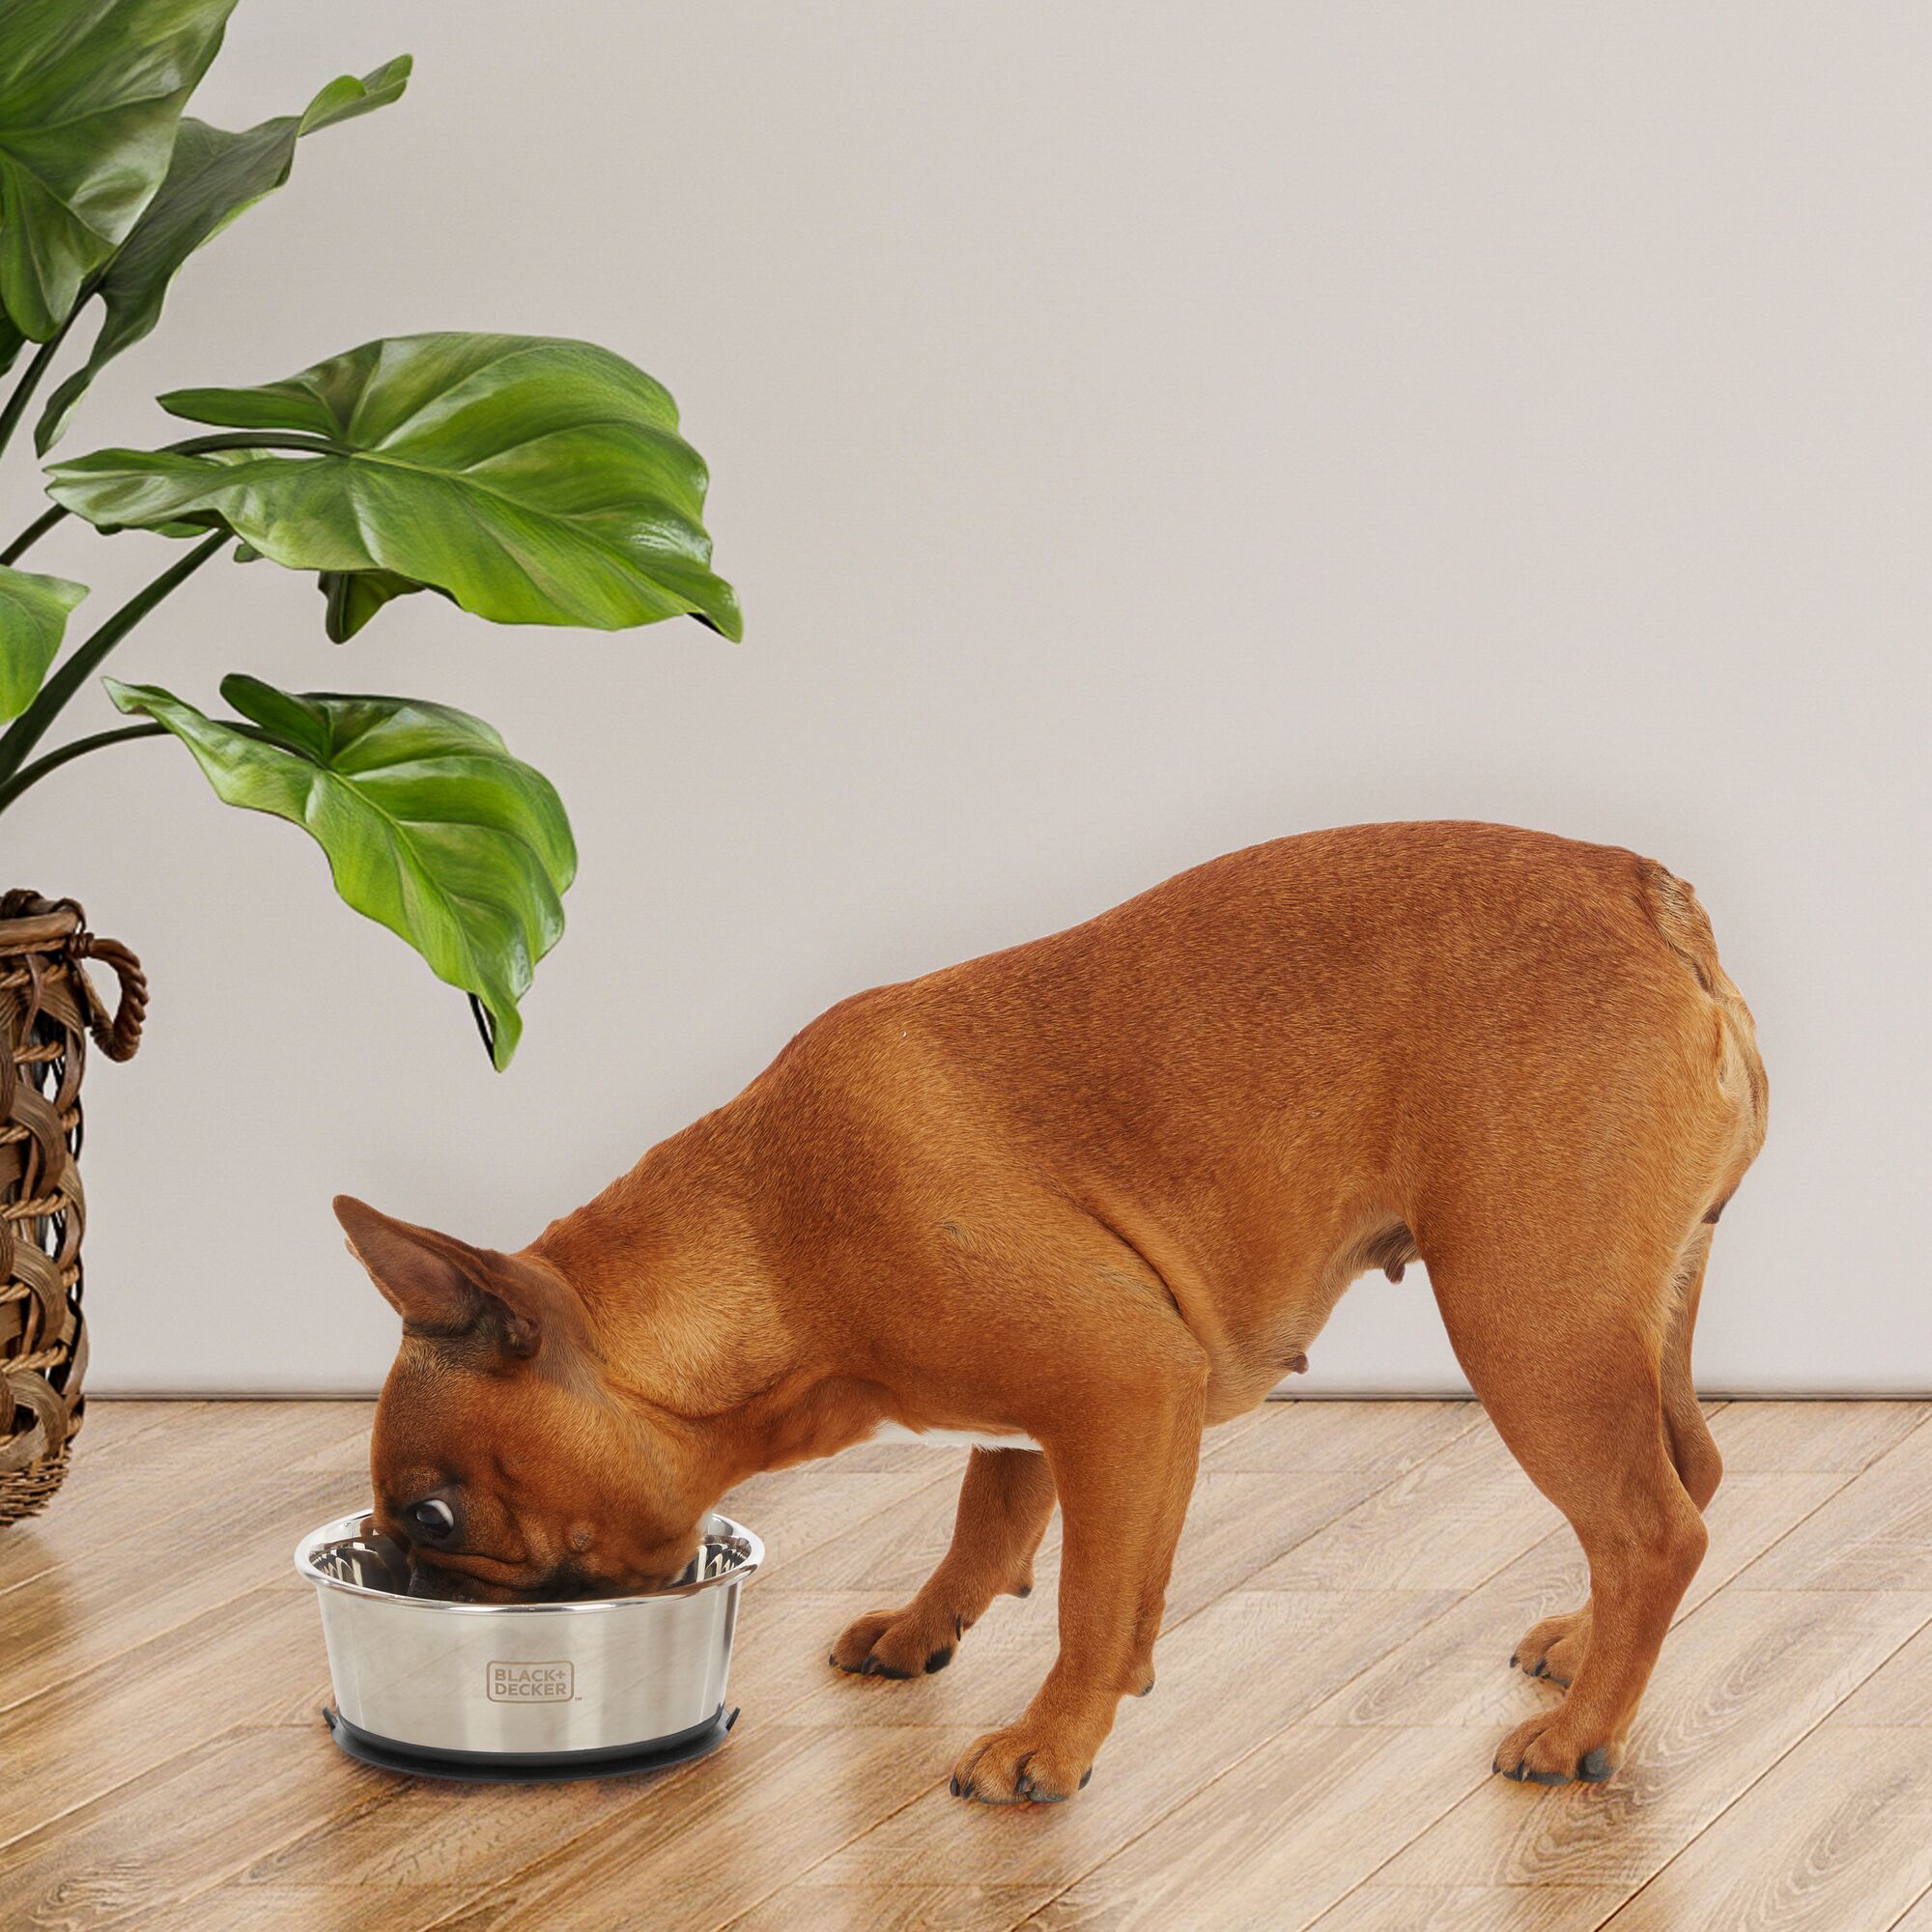 French bulldog eating out of a BLACK+DECKER stainless steel suction cup dog bowl